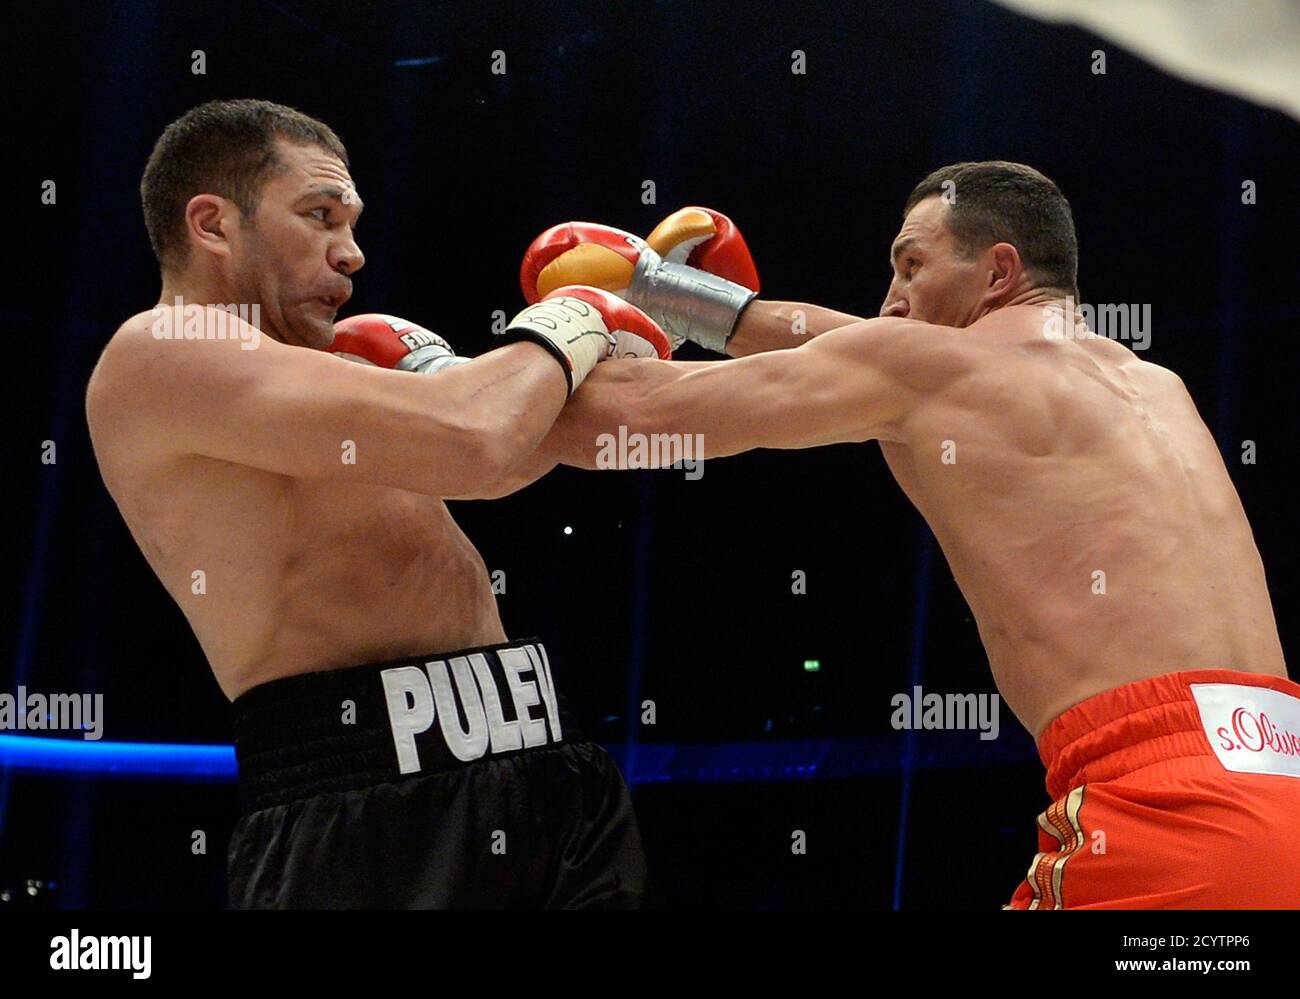 Excel apotek Observation Ukrainian WBA, WBO, IBO and IBF heavyweight boxing world champion Vladimir  Klitschko (R) delivers a punch to his challenger Bulgarian Kubrat Pulev  during their title fight in Hamburg, November 15, 2014. REUTERS/Fabian